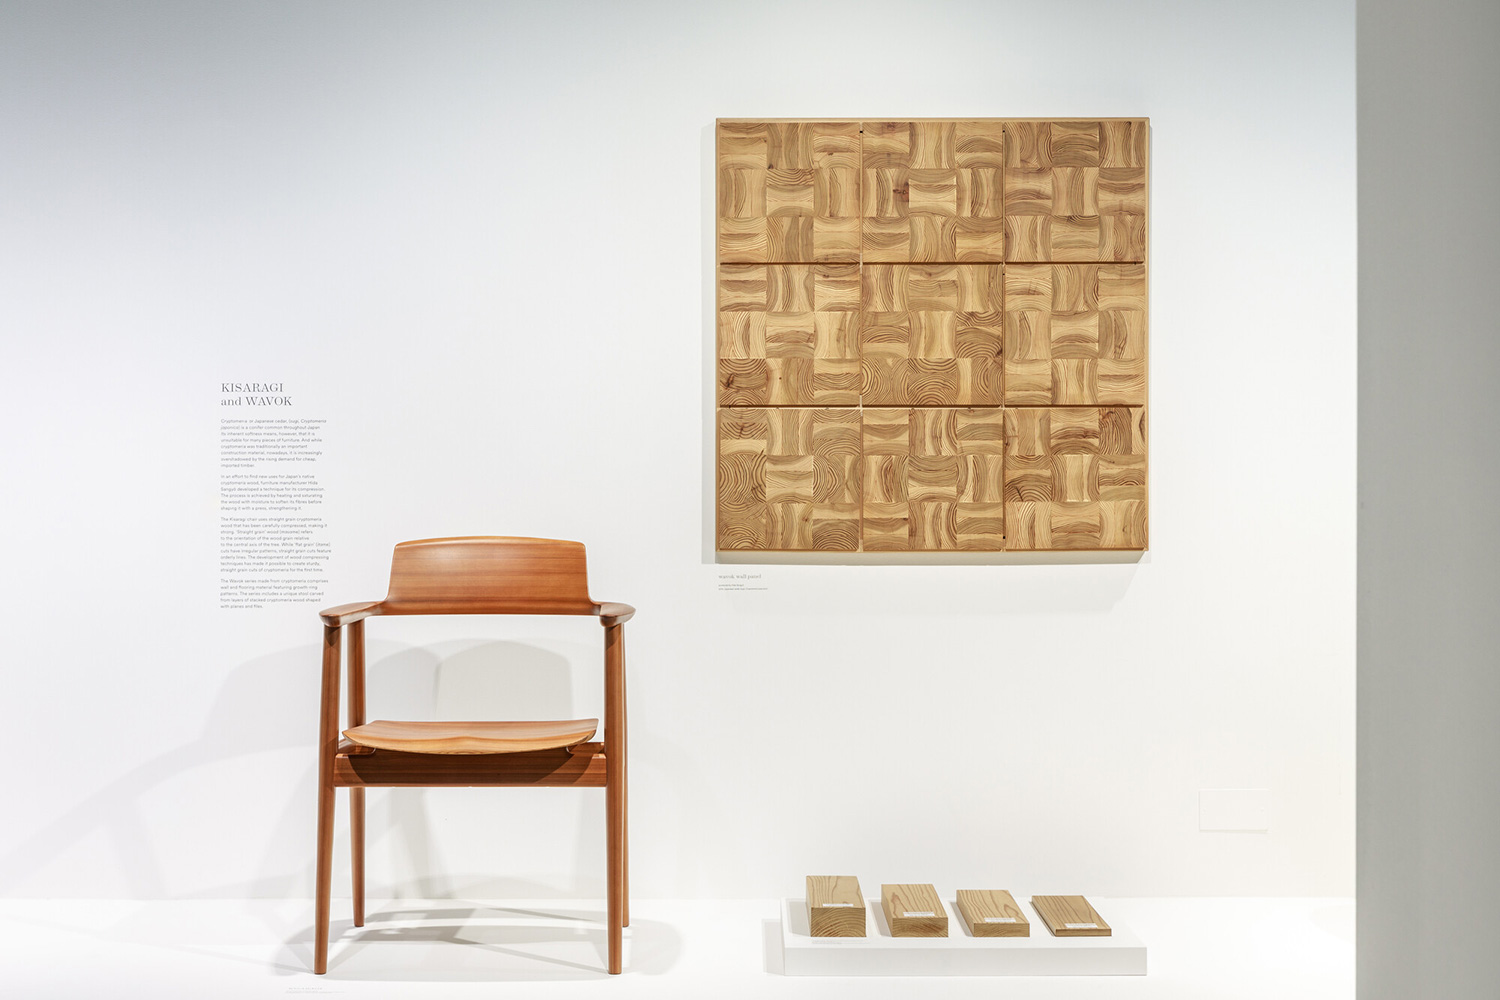 The Kisaragi chair and the wooden artwork from the Wavok series